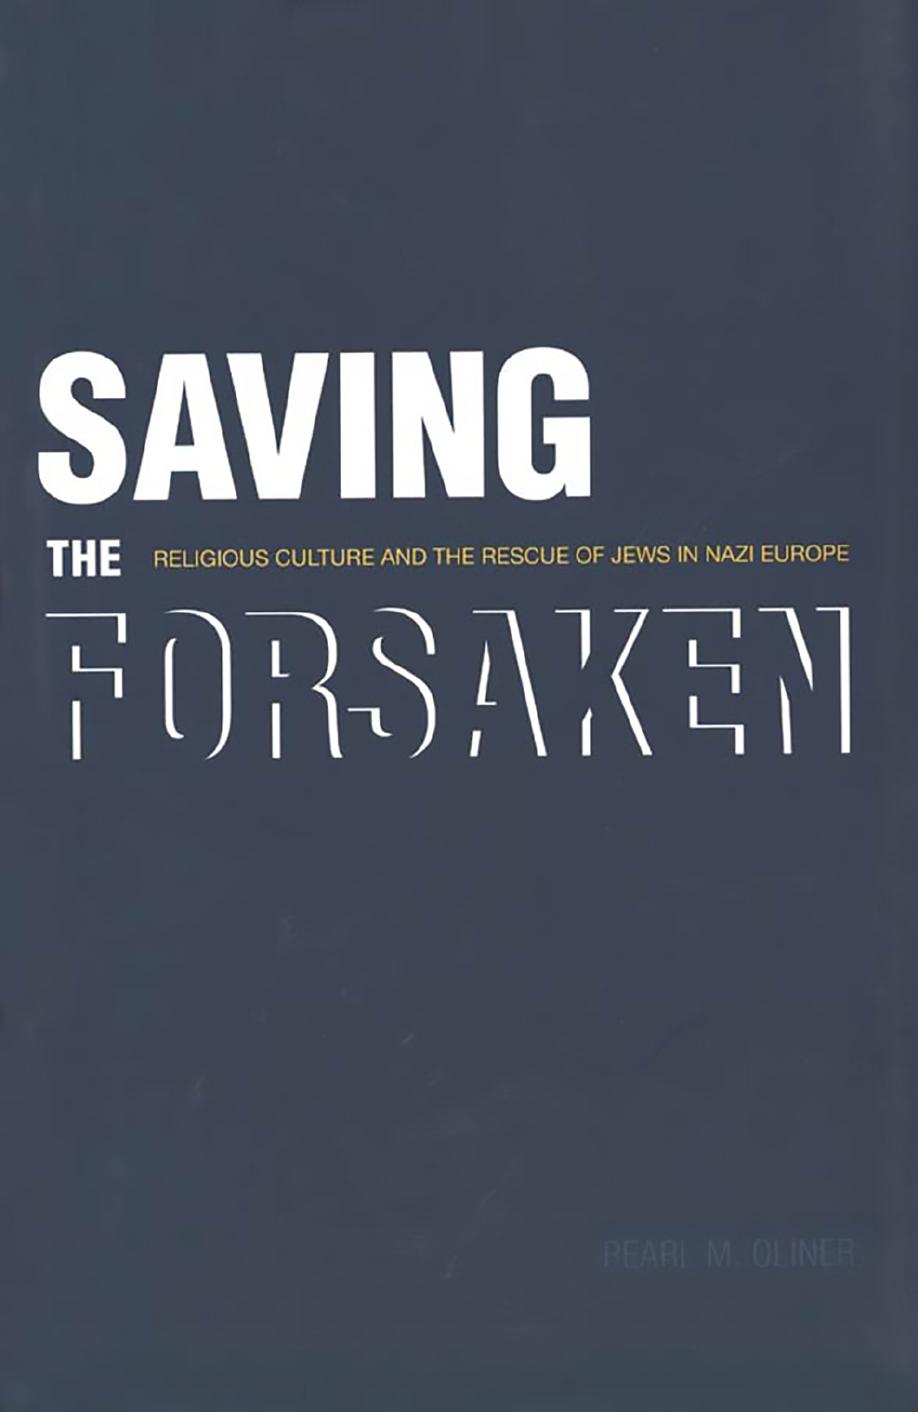 Saving the Forsaken: Religious Culture and the Rescue of Jews in Nazi Europe by Pearl M. Oliner